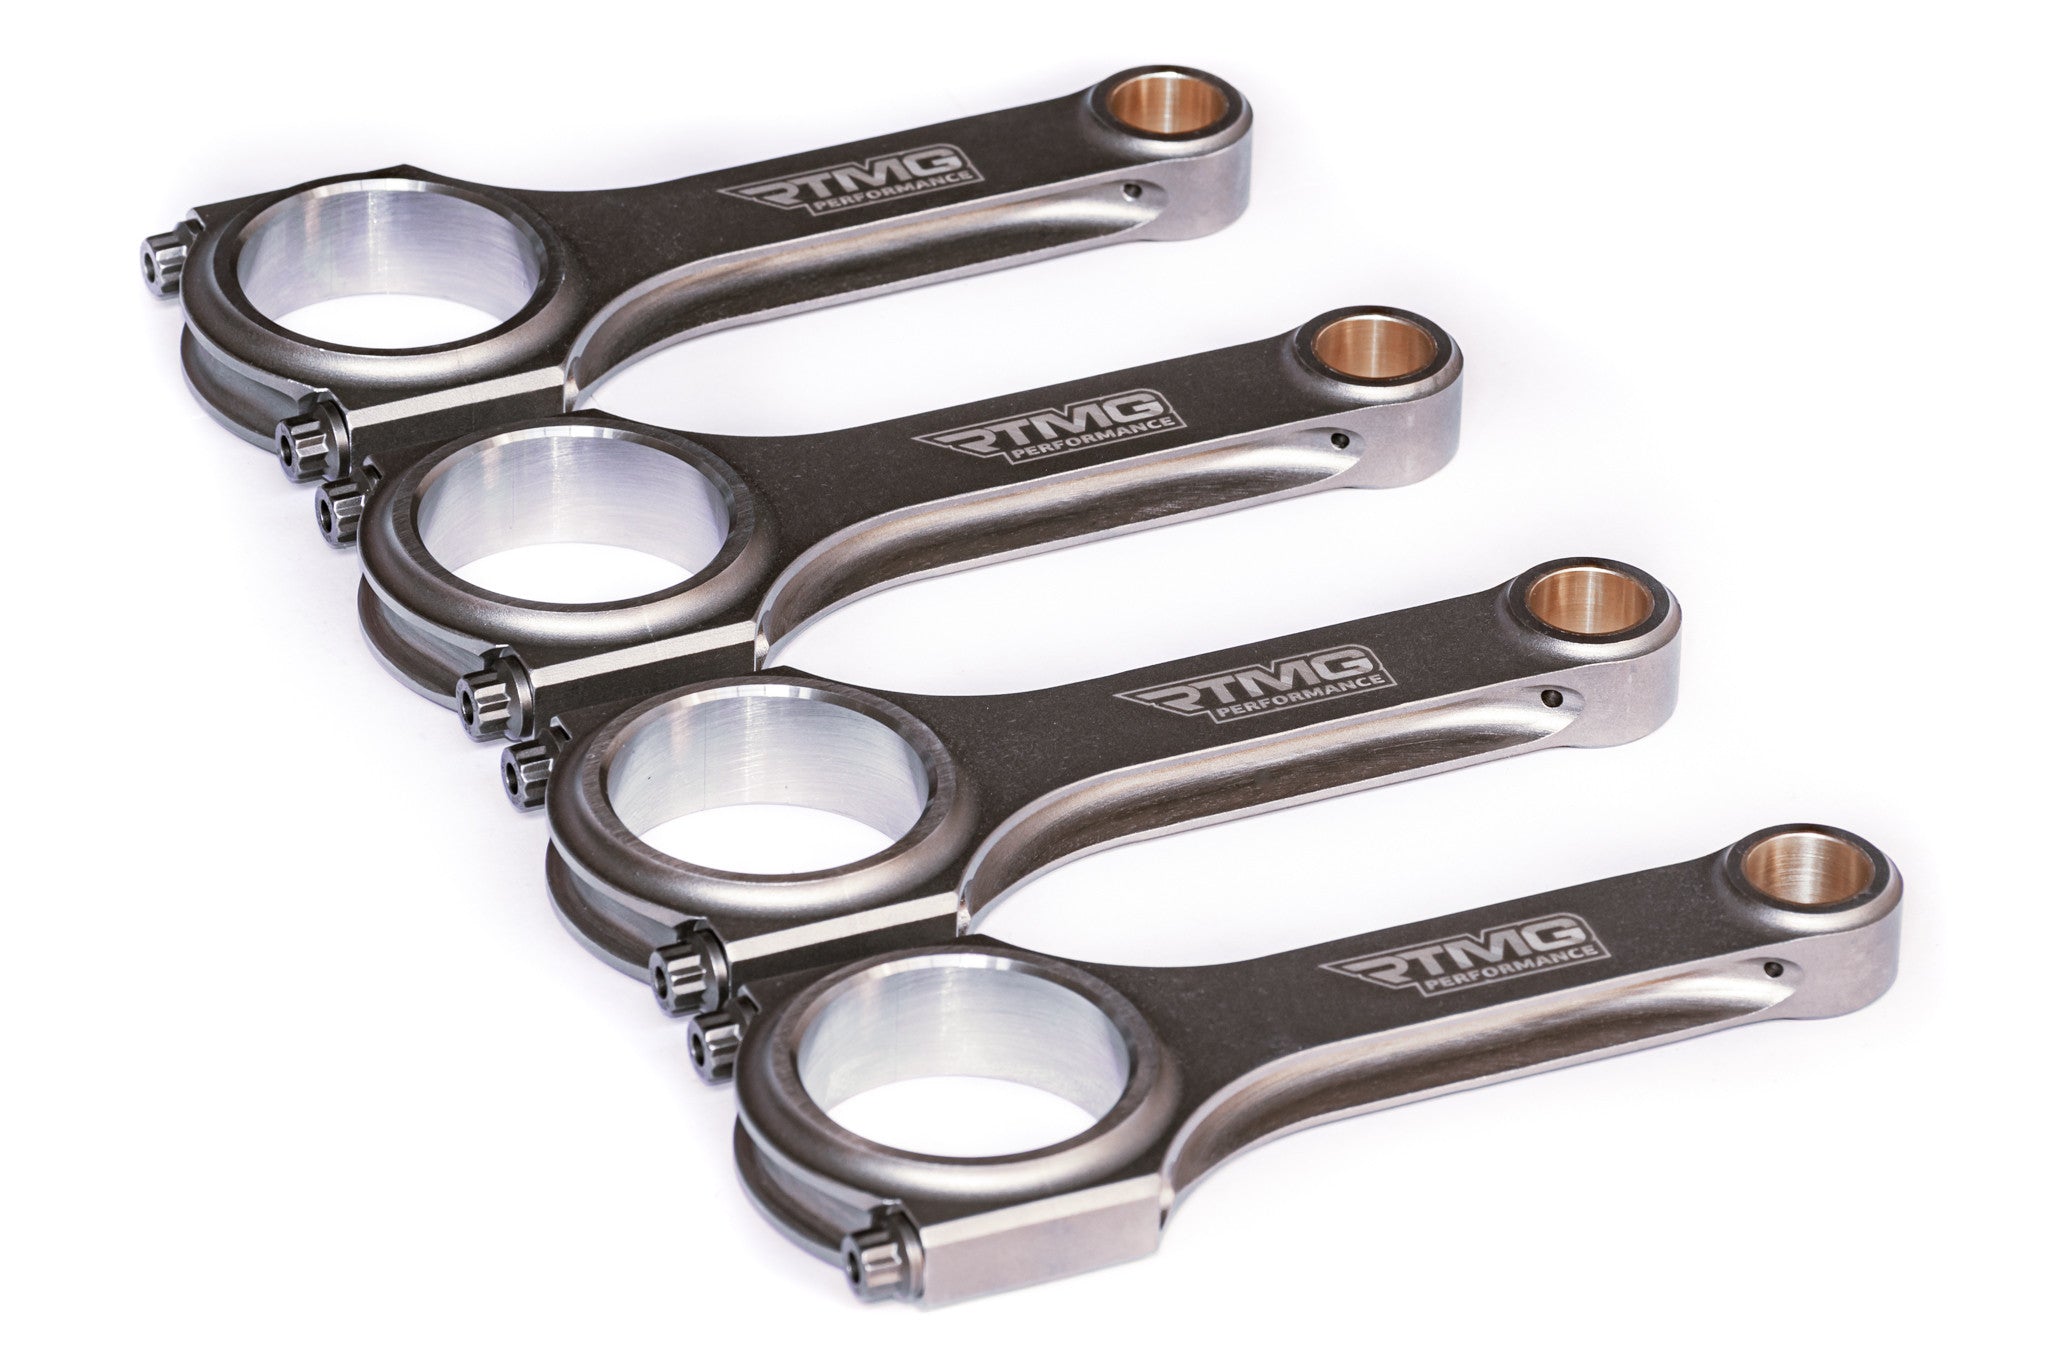 Connecting Rods Set for 1.4 TSI EA111 - Up to 600HP - RTMG Performance